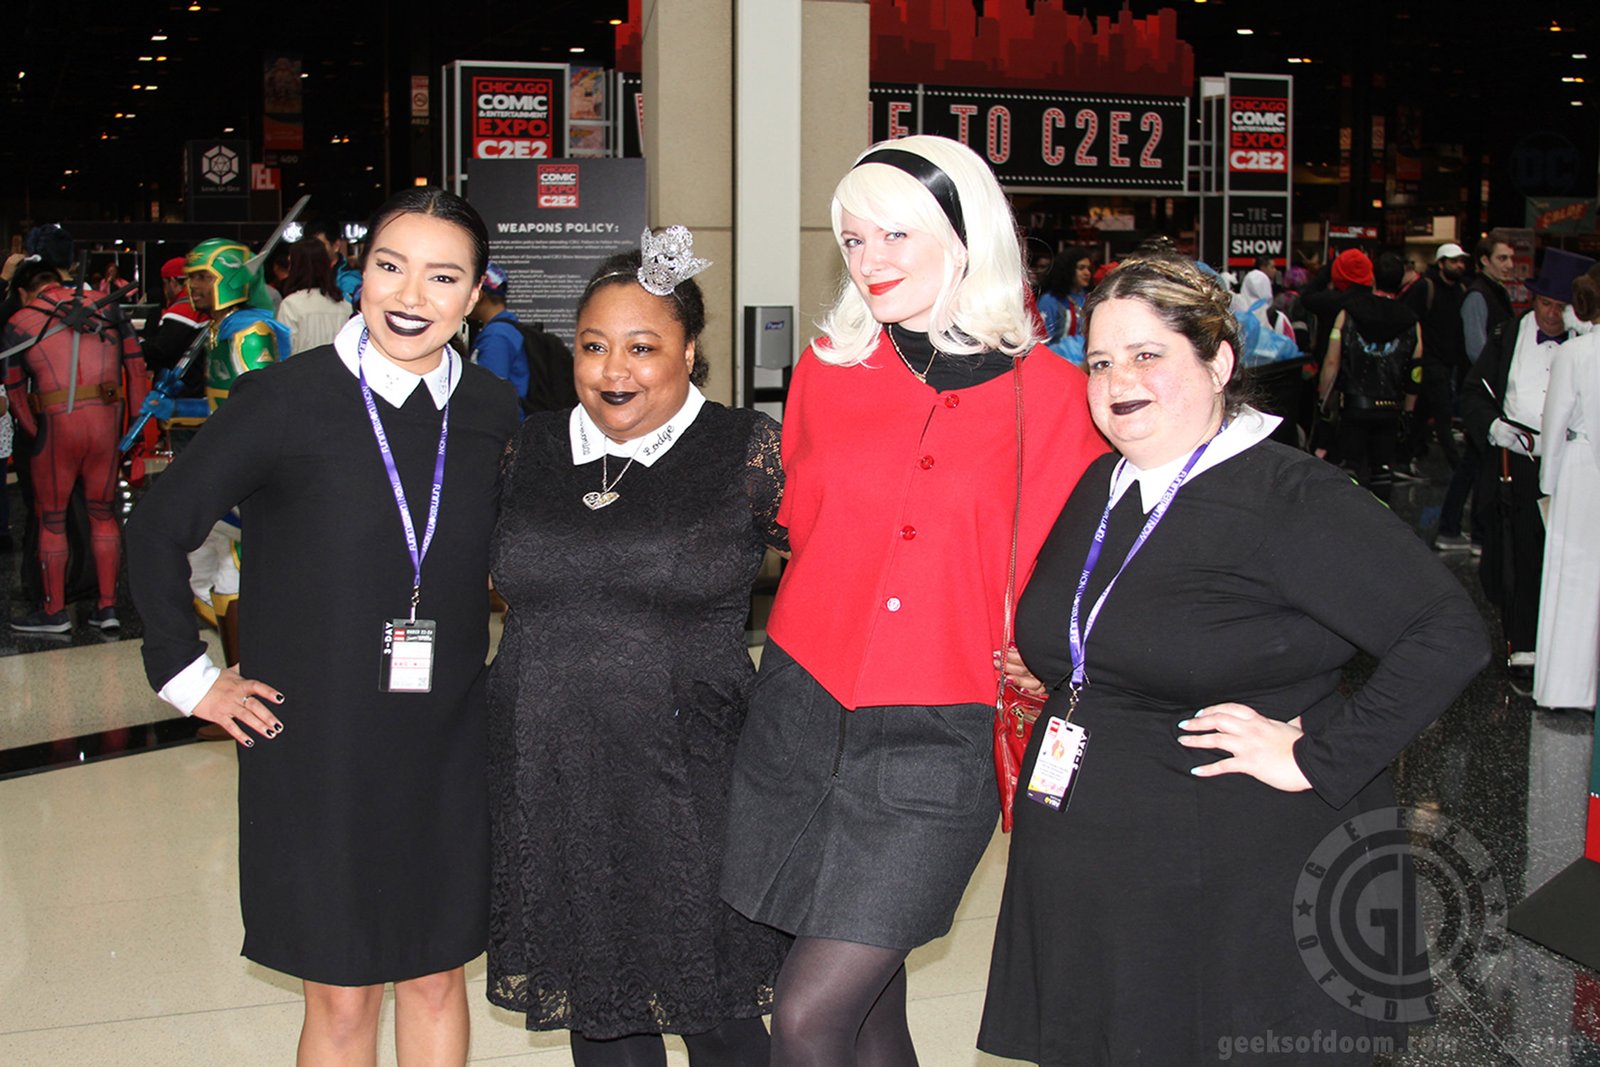 C2e2 2019 Cosplay 42 Sabrina Witches